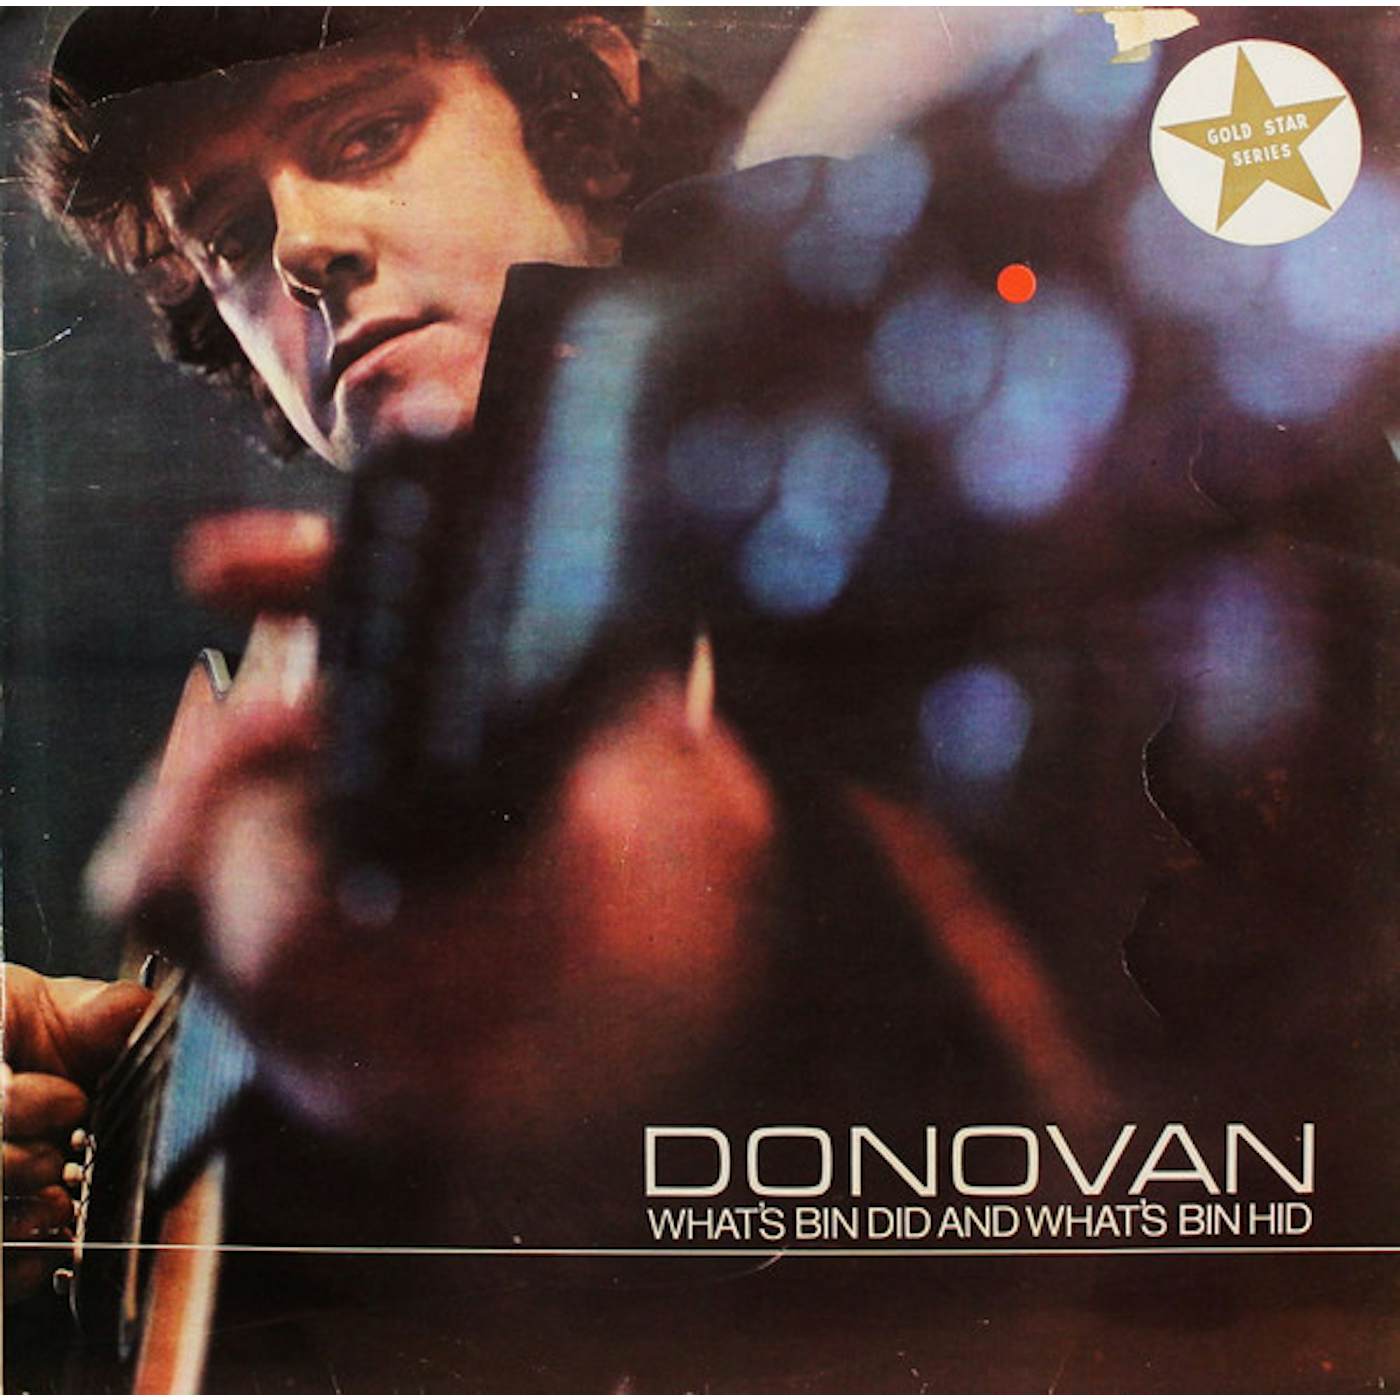 Donovan What's Bin Did and What's Bin Hid Vinyl Record